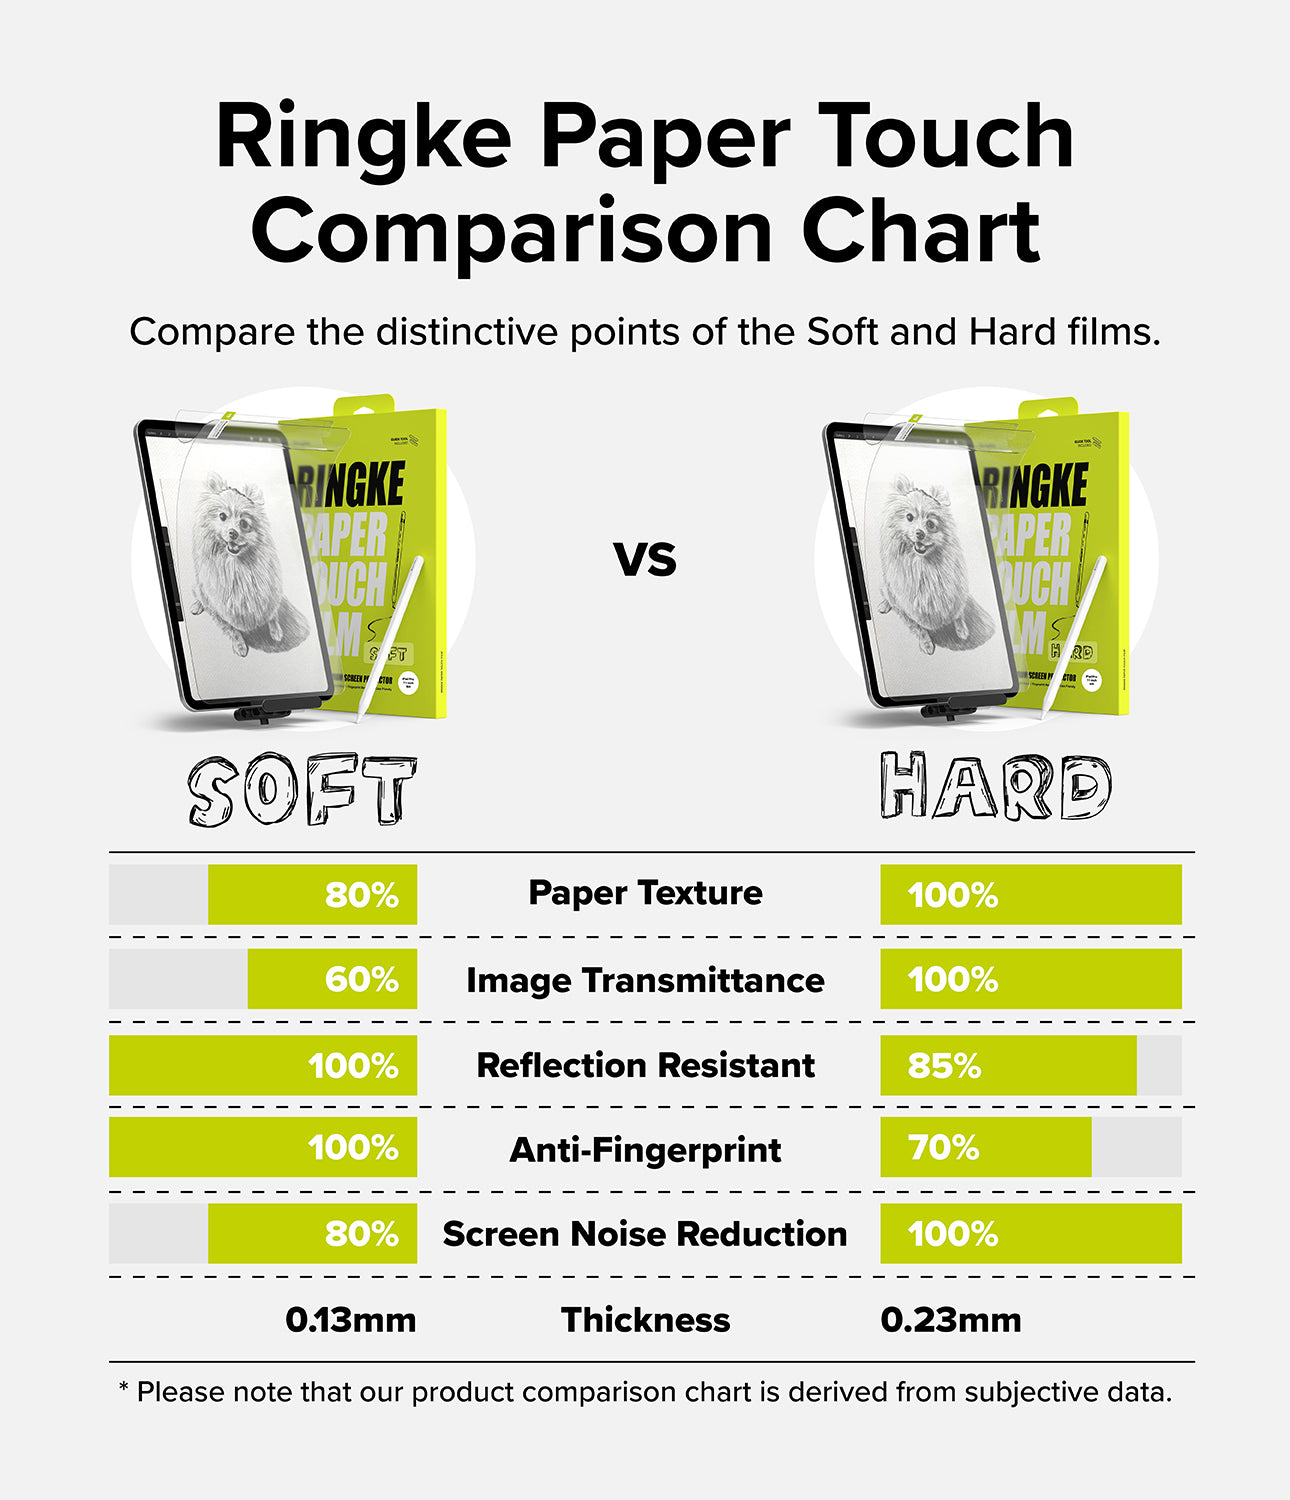 iPad Pro 11" (M4) Screen Protector | Paper Touch Film - Ringke Paper Touch Comparison Chart. Compare the distinctive points of the Soft and Hard films.